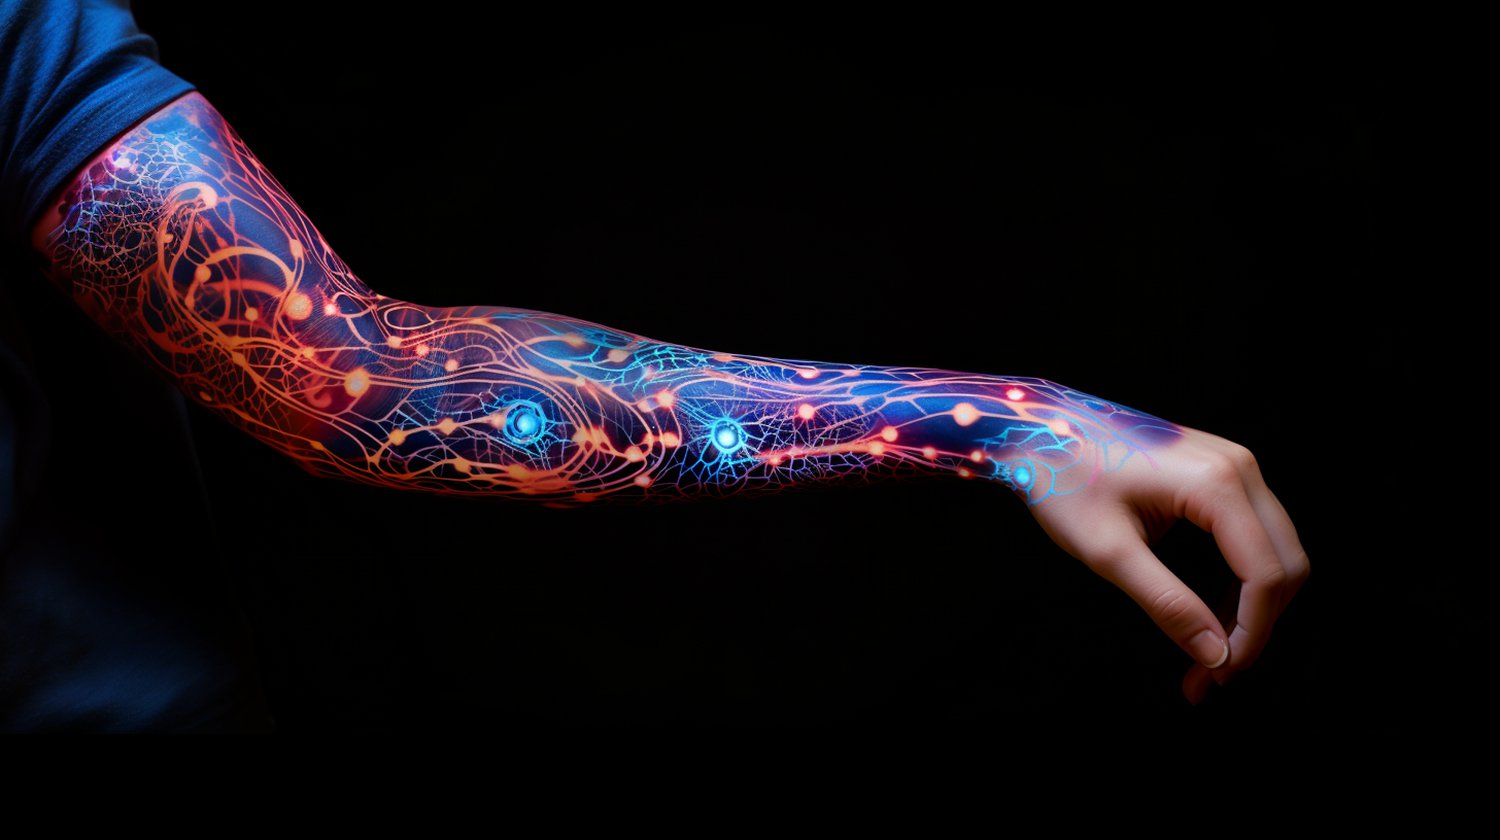 Close-up of a person's forearm adorned with realistic AI Art Tattoos and tattooing